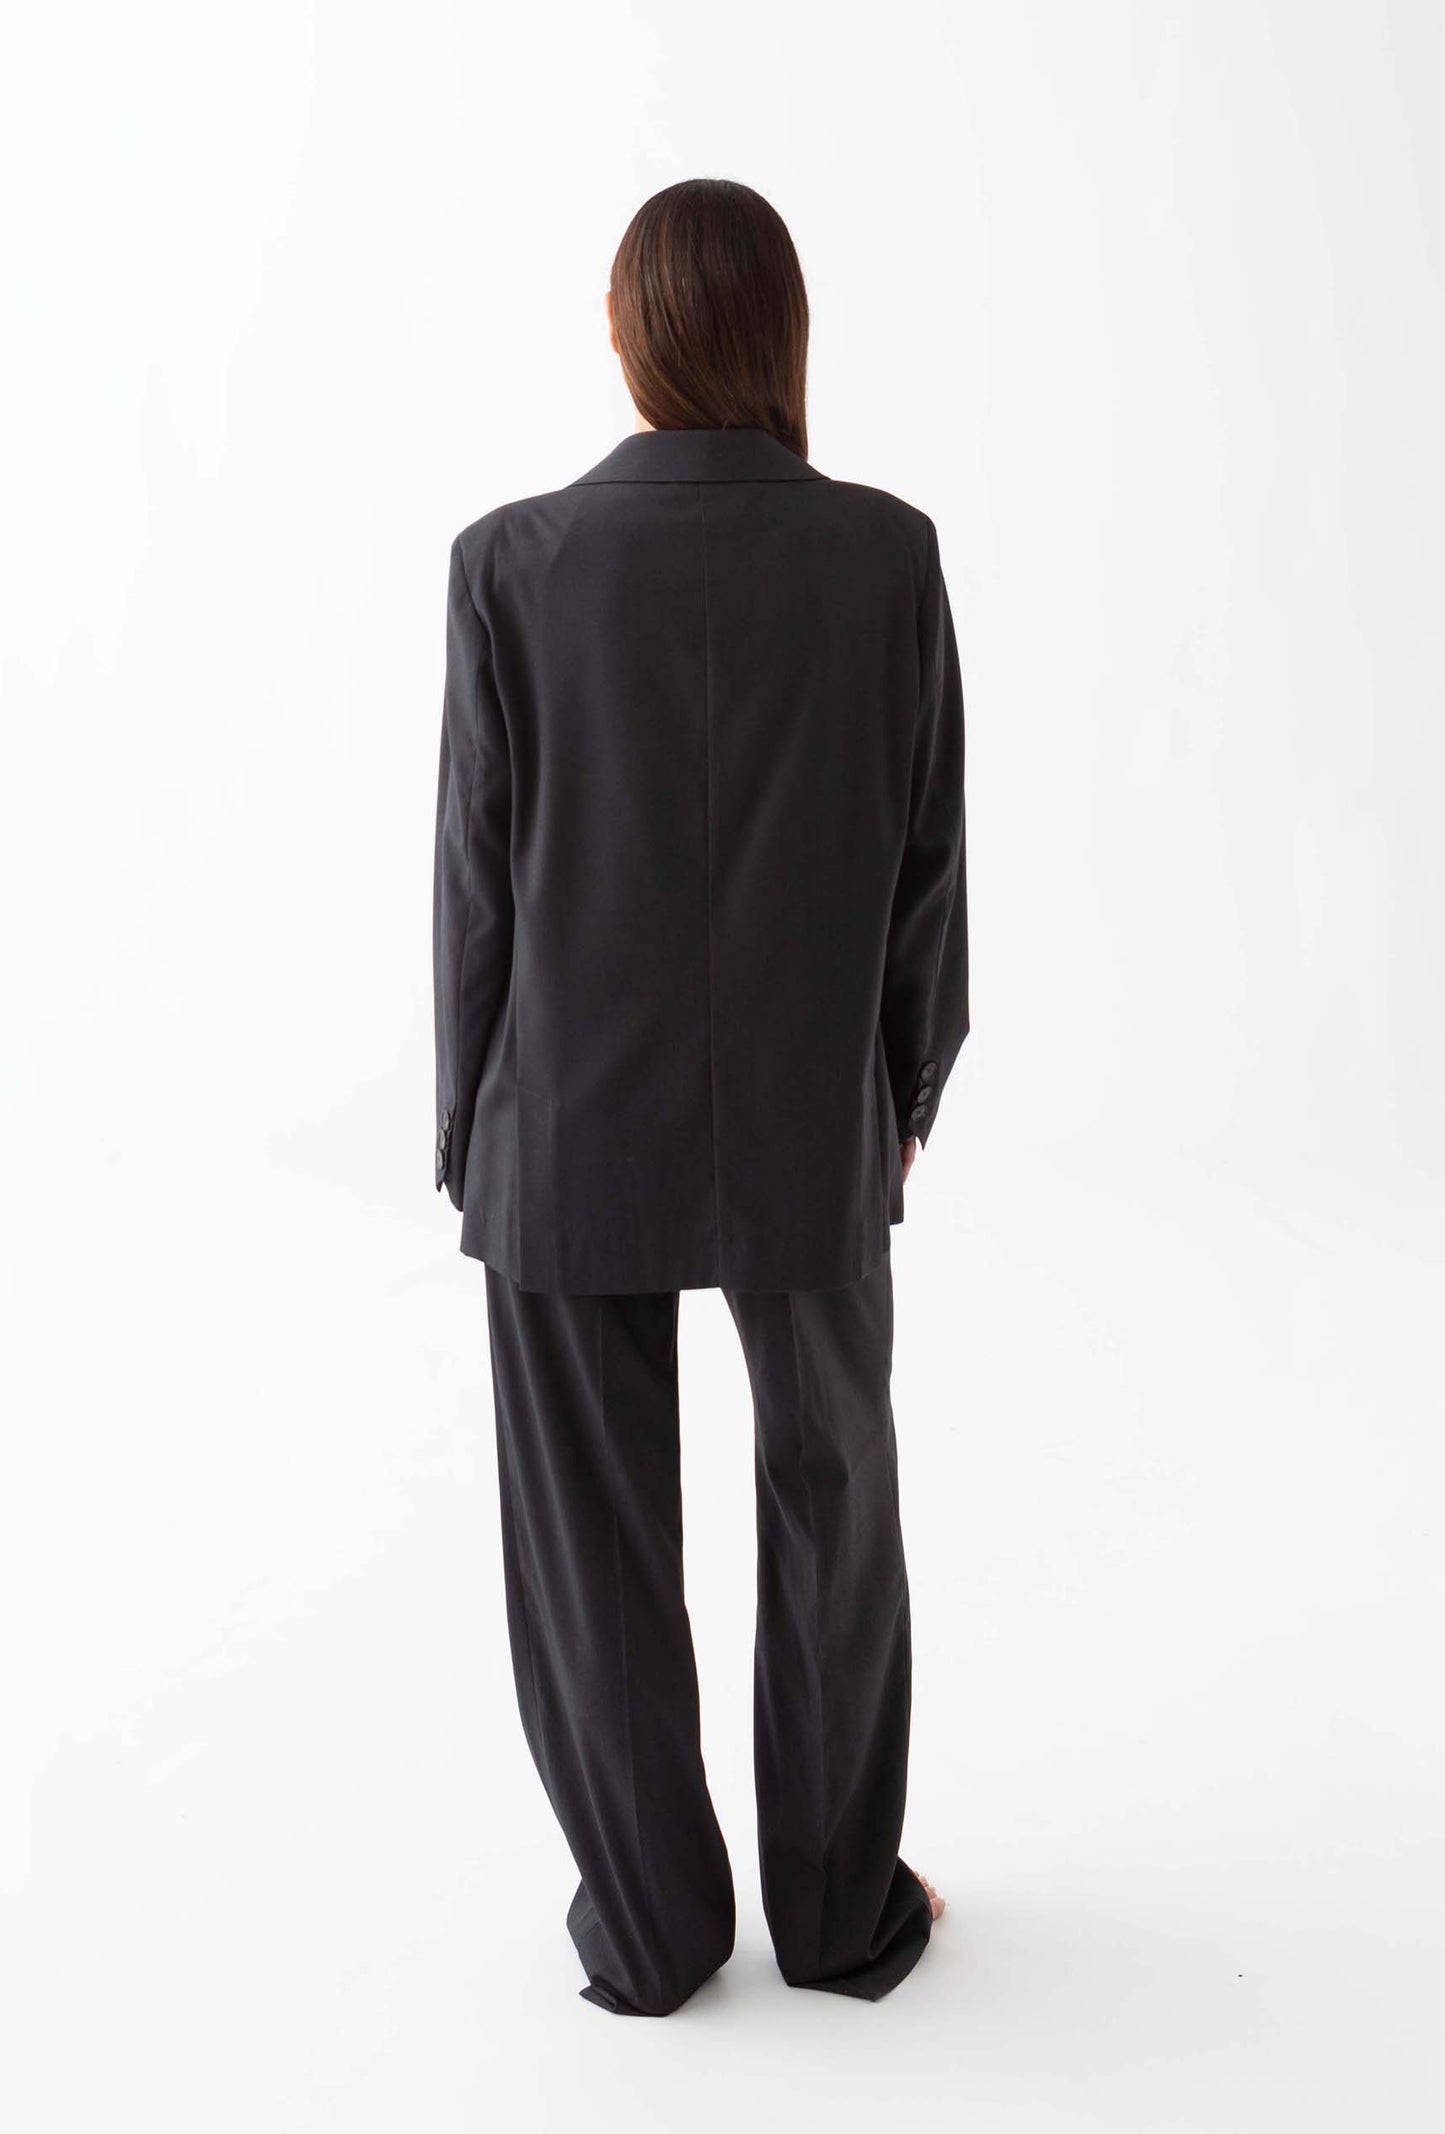 The Tailor Suits: Charcoal - Trousers